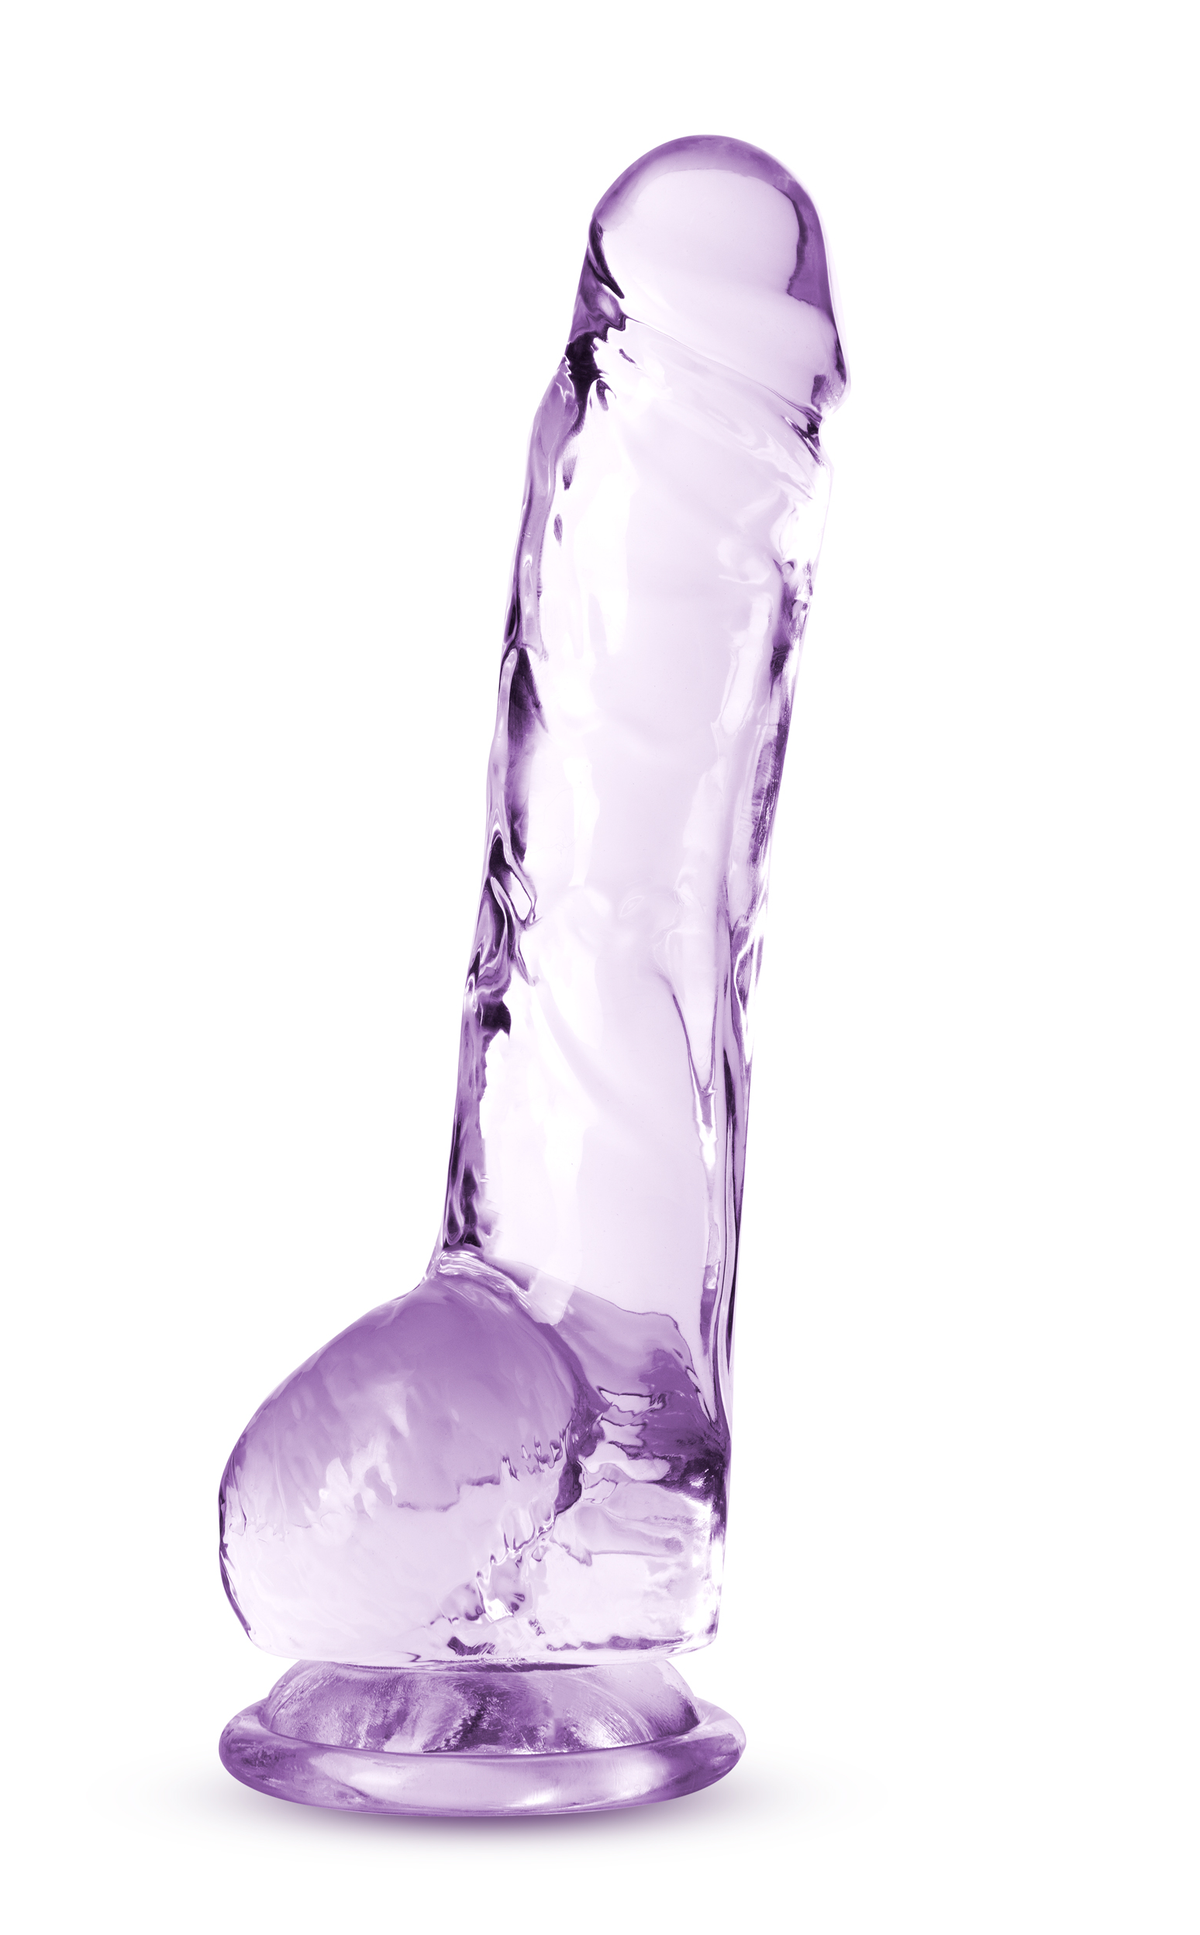 naturally yours 8 inch crystalline dildo amethyst